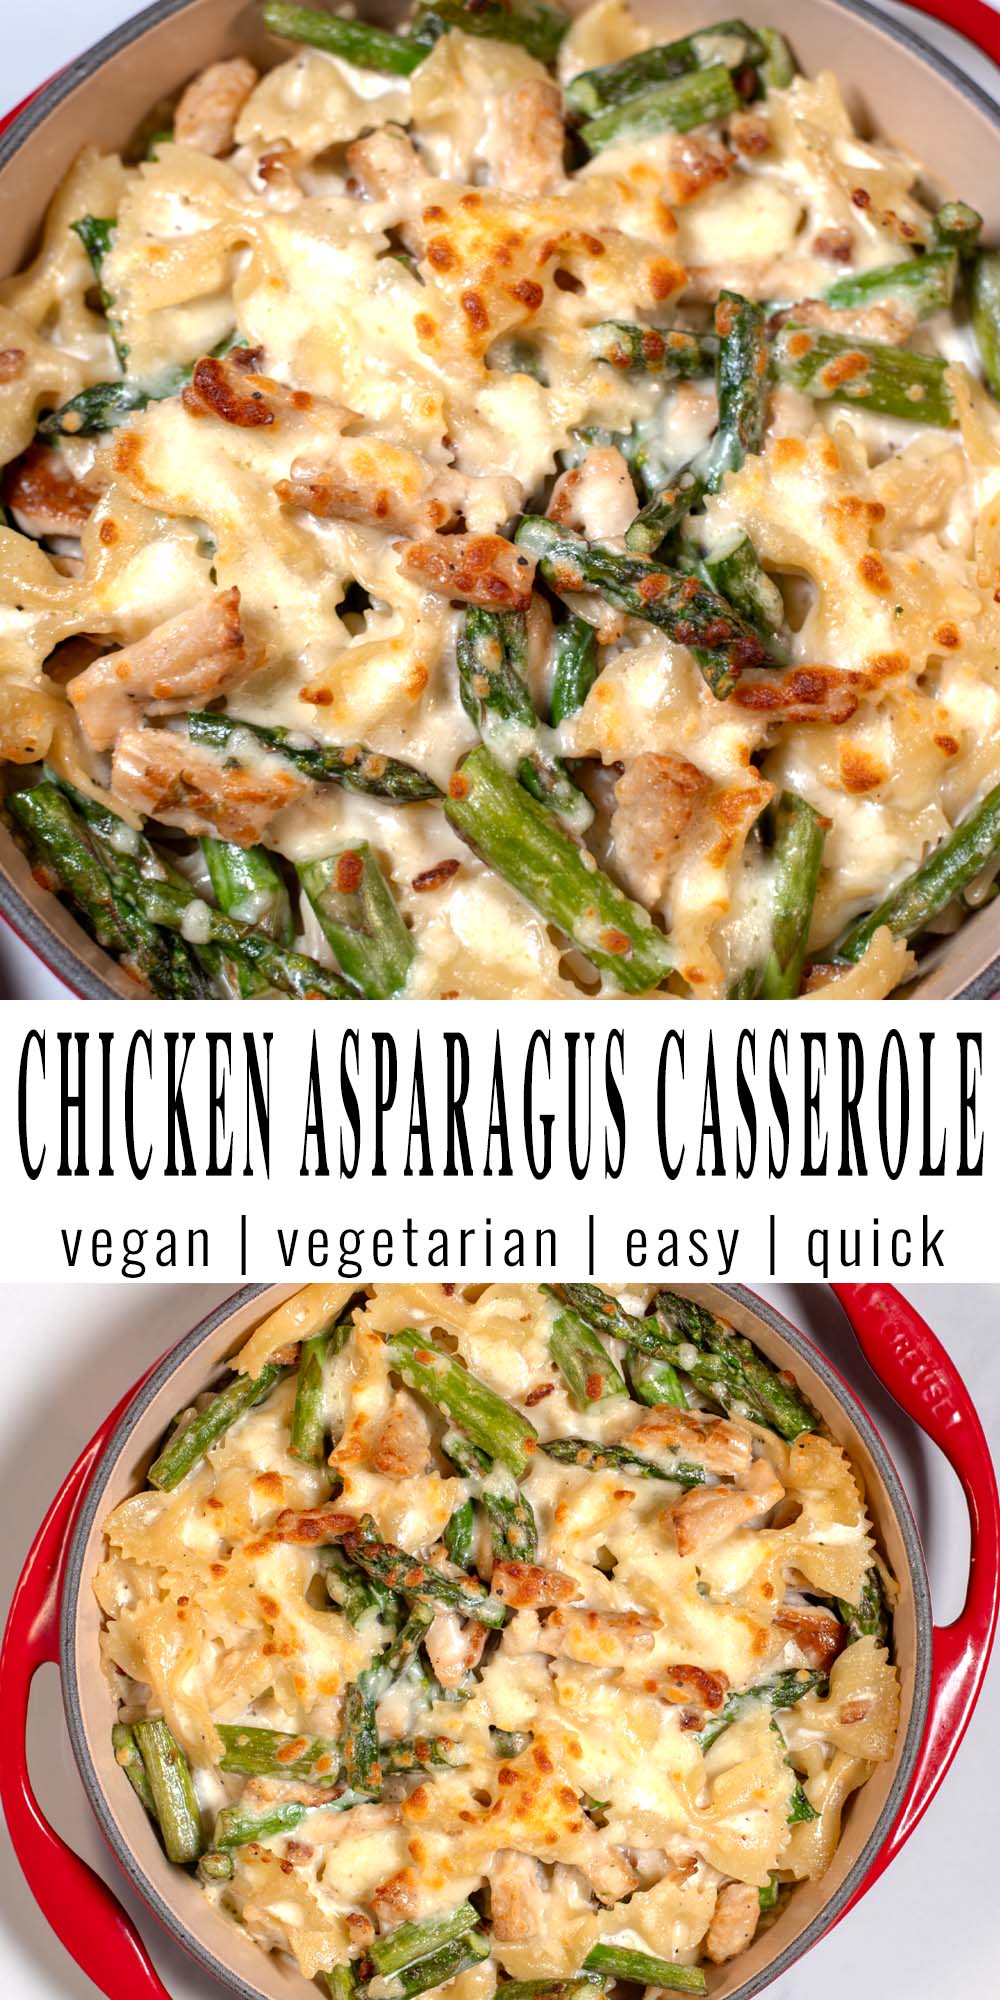 Collage of two photos showing Chicken Asparagus Casserole with recipe title text.